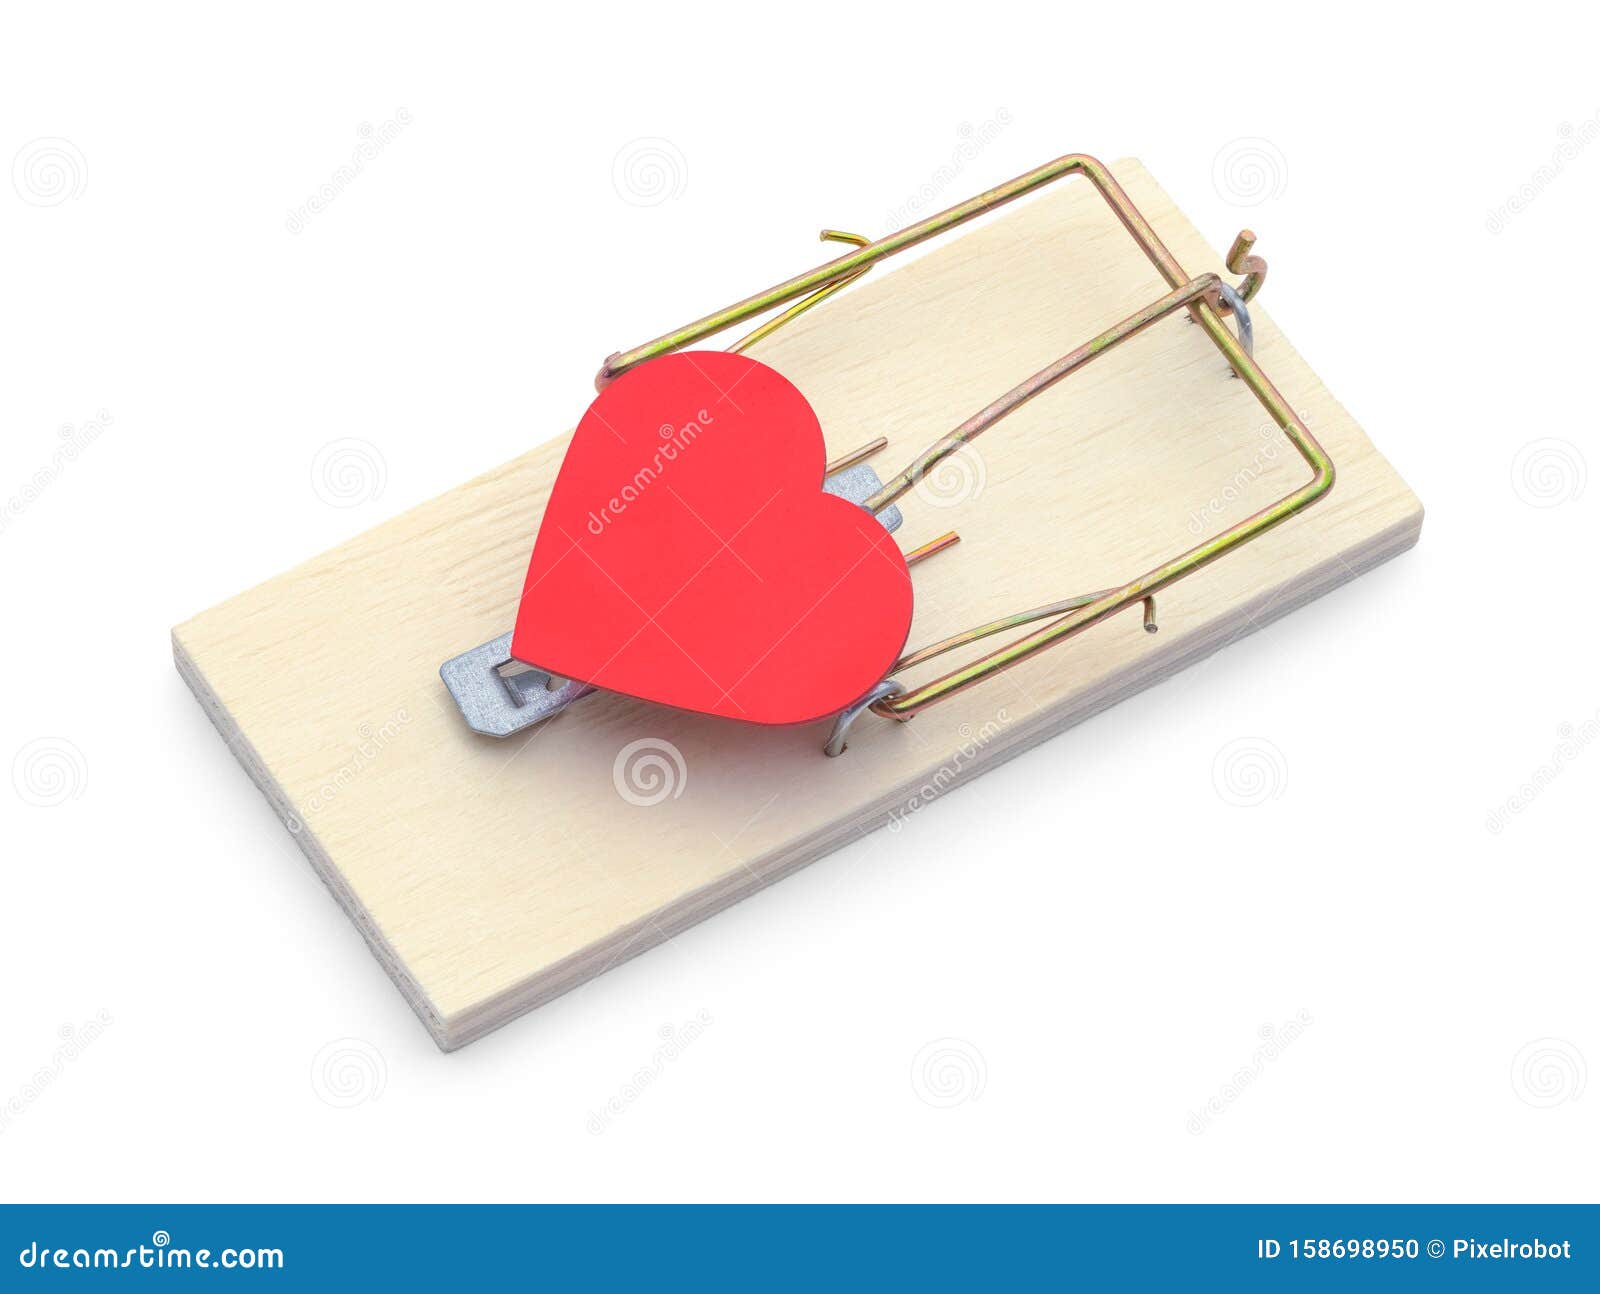 Heart Mouse Trap stock photo. Image of empty, marriage - 158698950